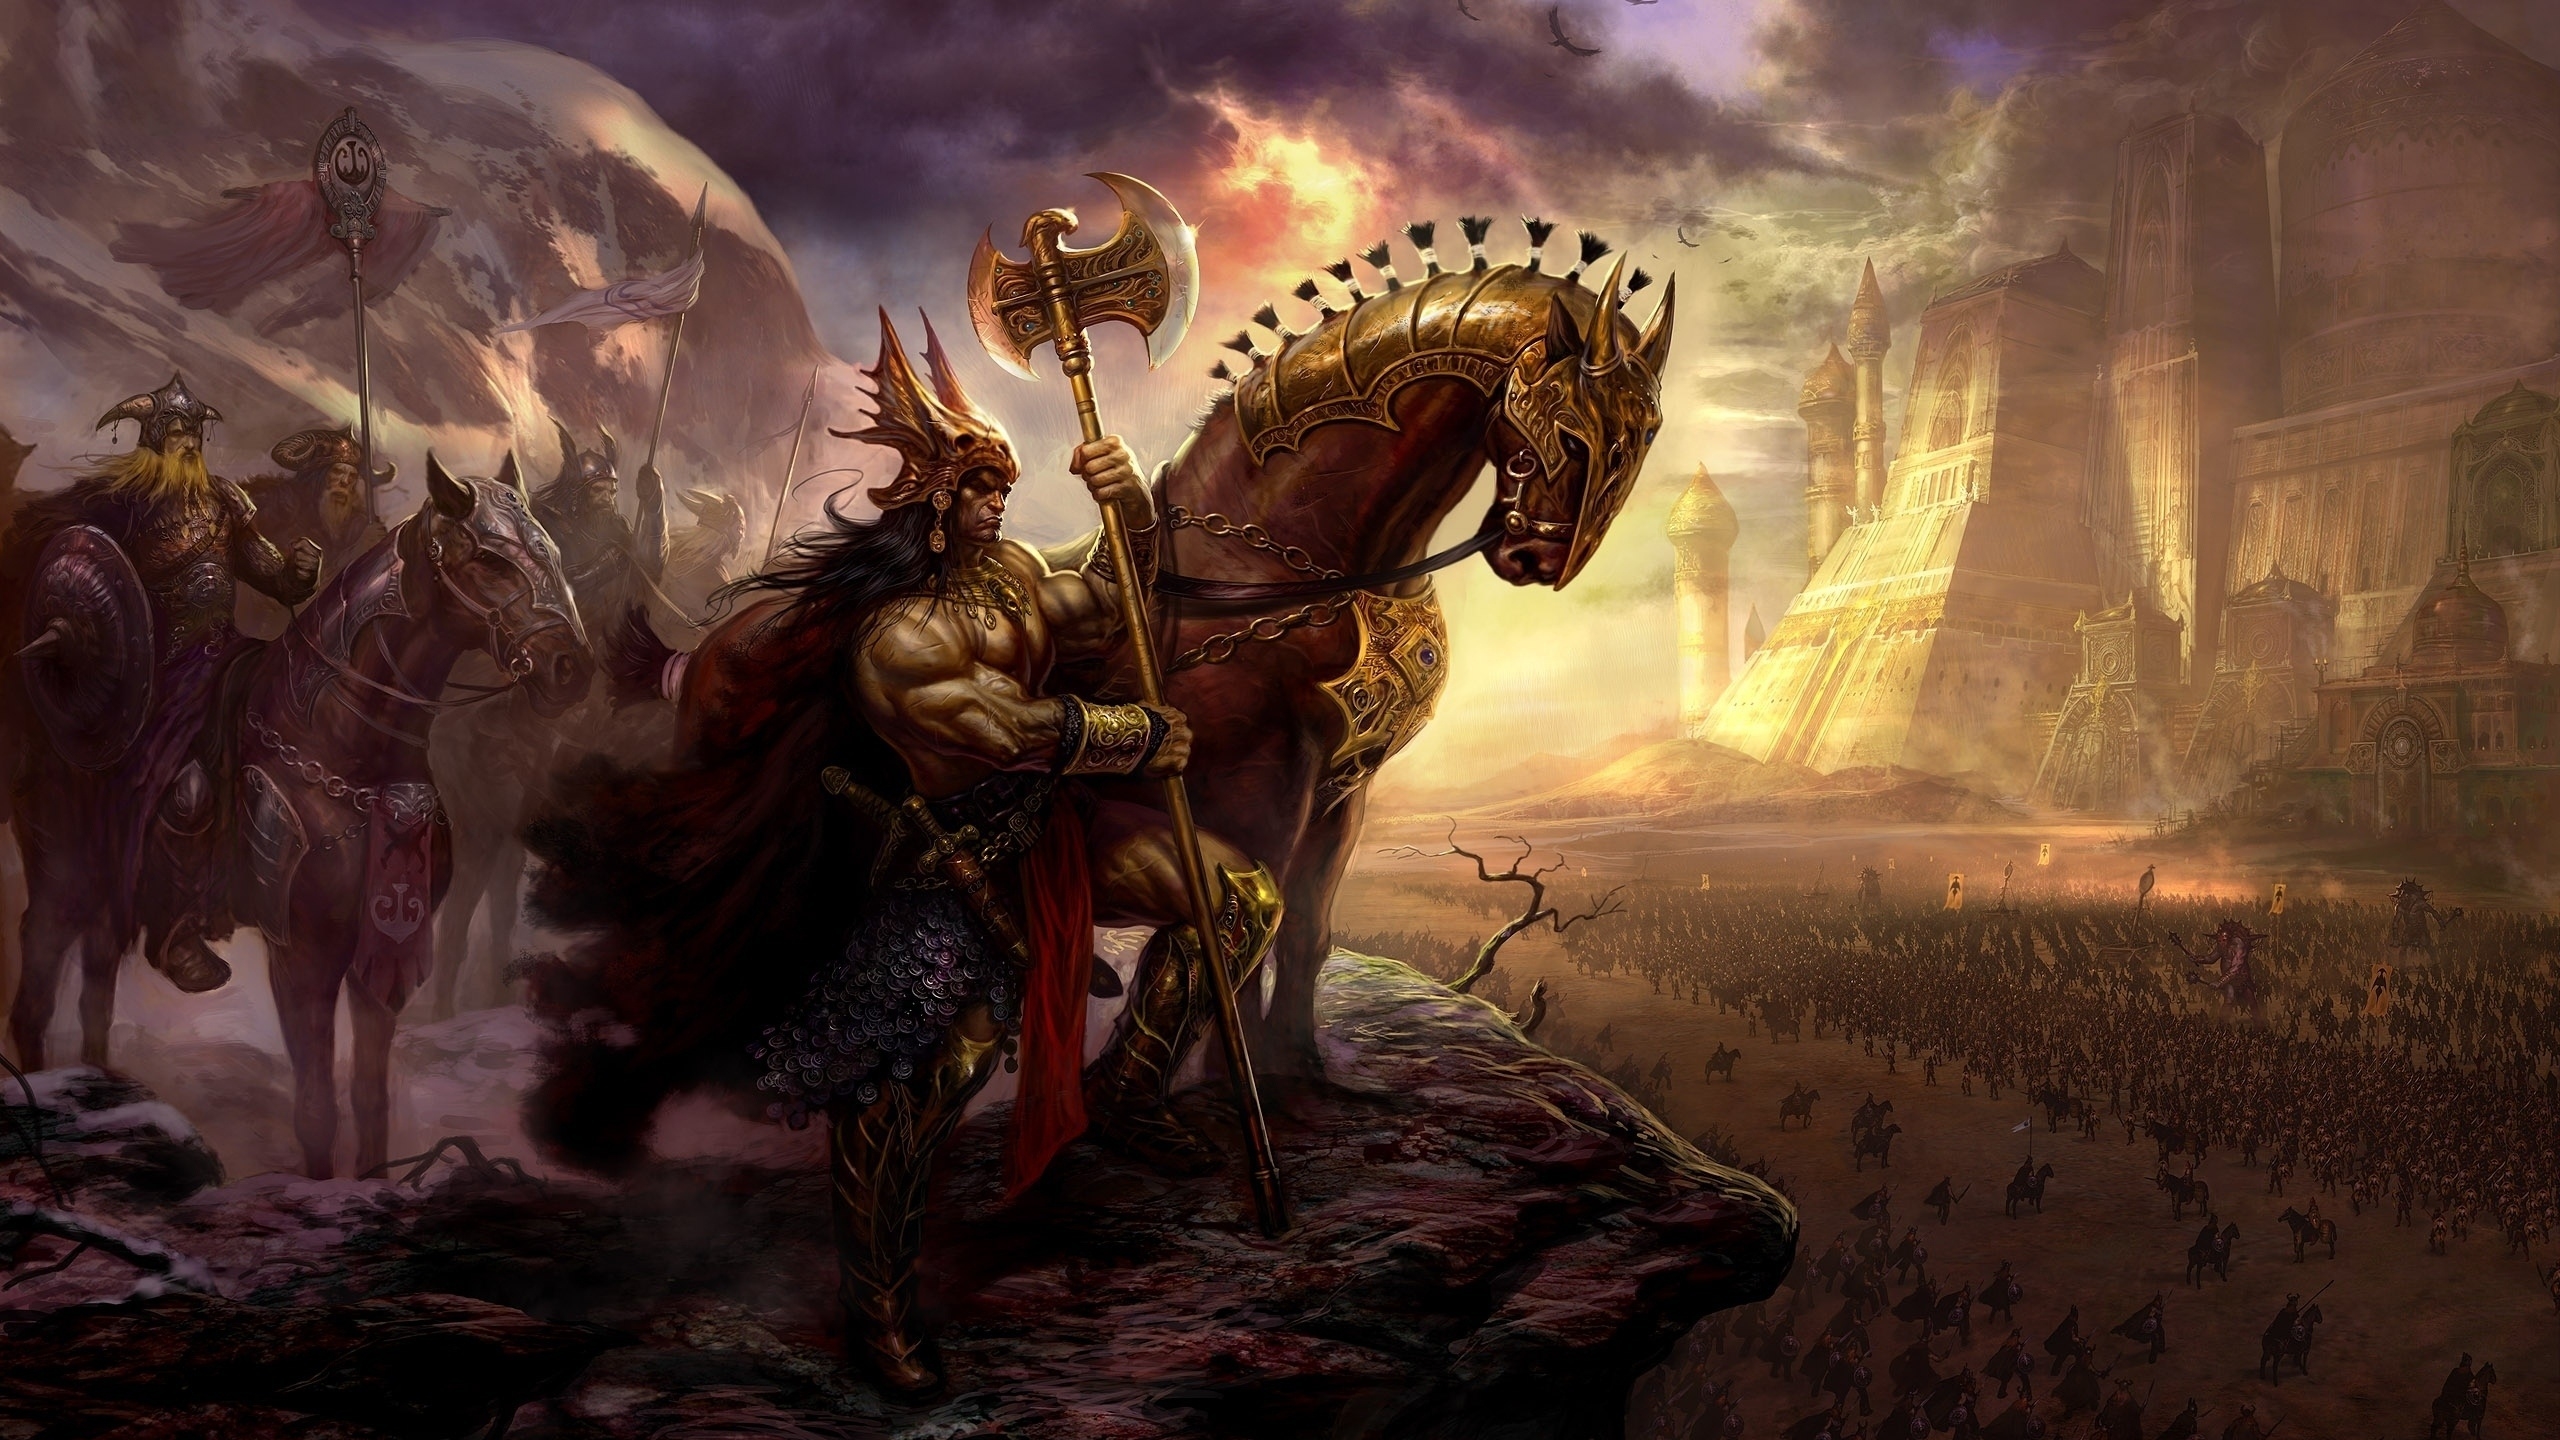 Video Game Age Of Conan 2560x1440